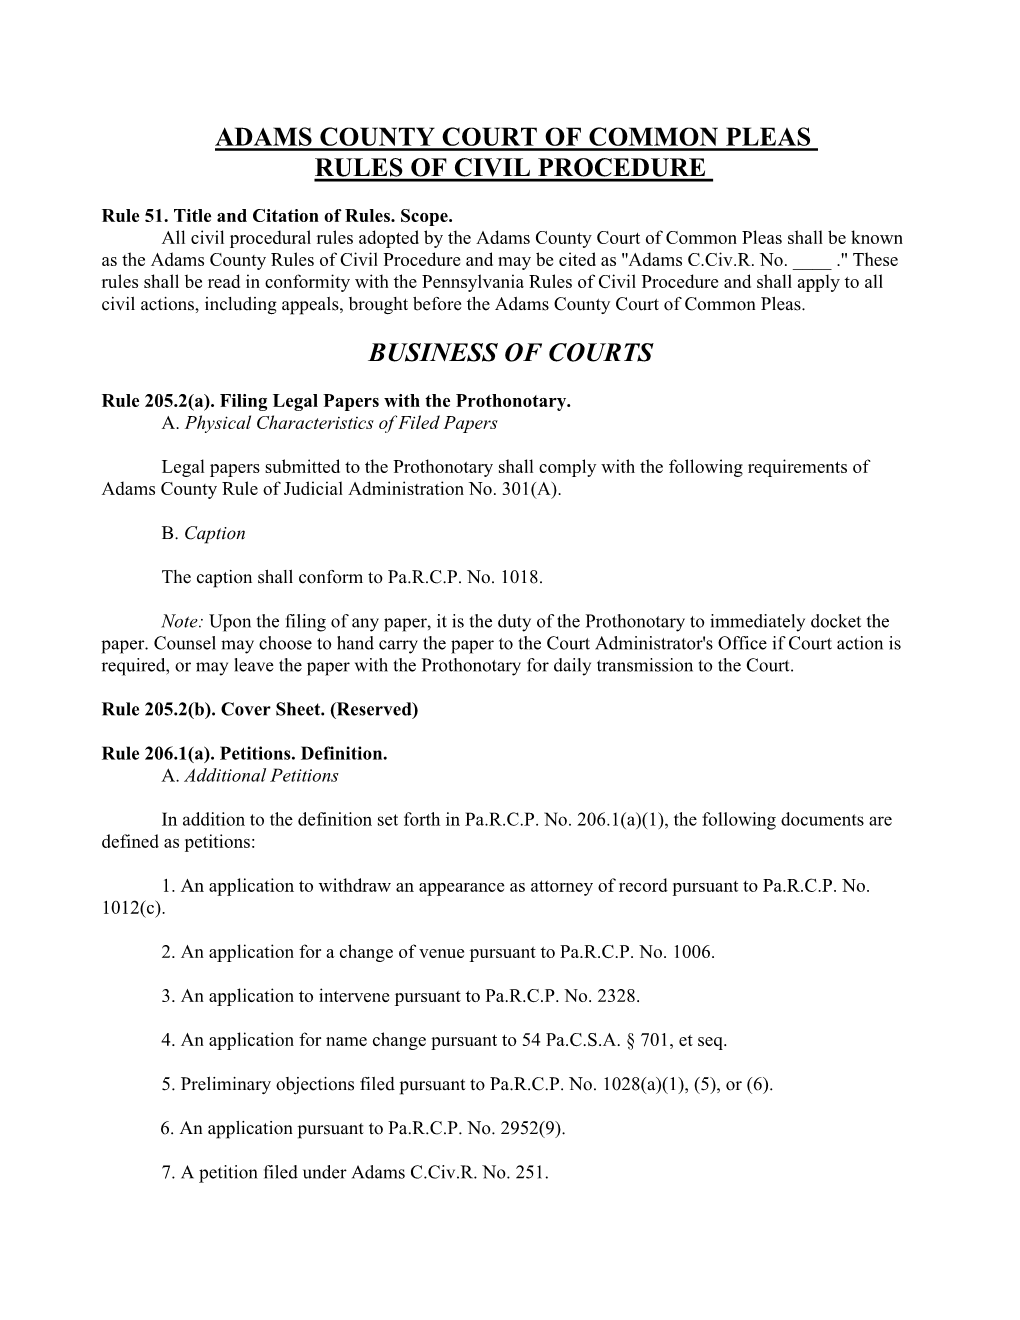 Adams County Rules of Civil Procedure and May Be Cited As ''Adams C.Civ.R